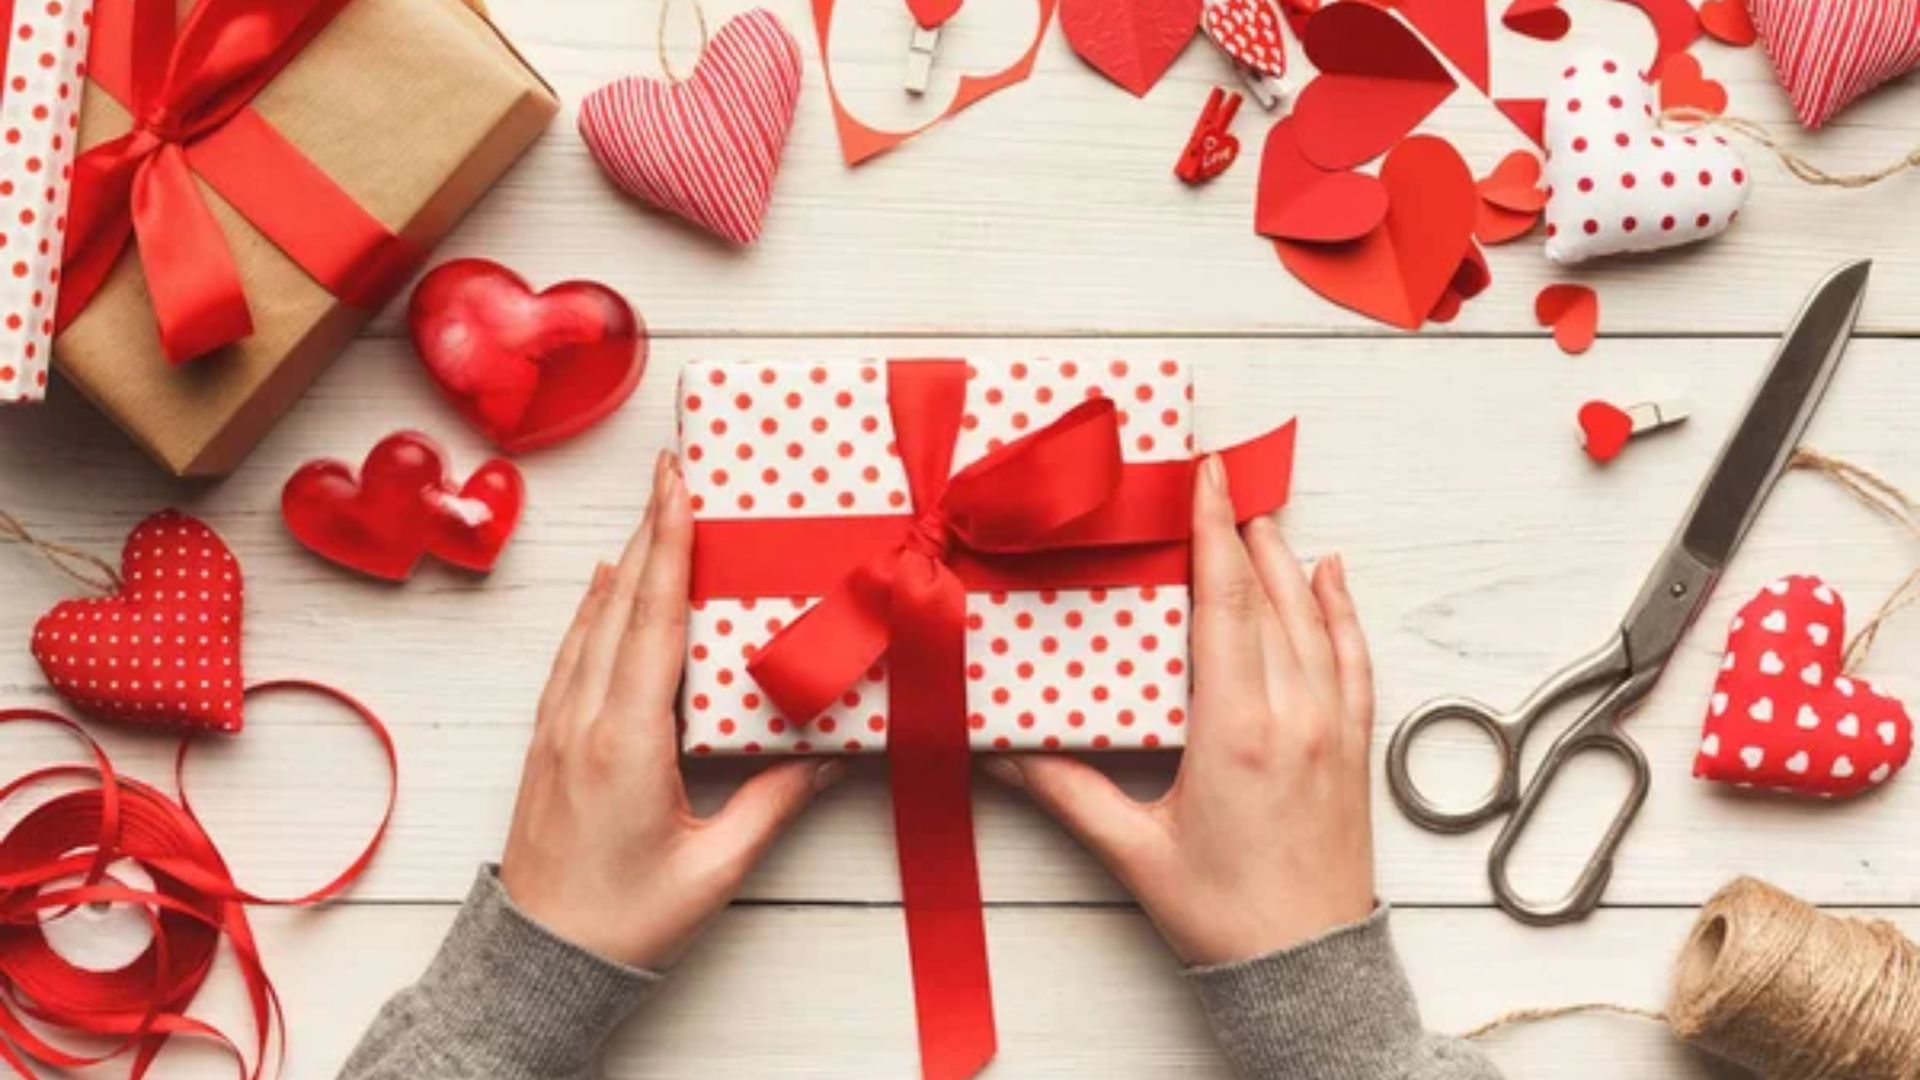 Last-minute Valentine’s Day gift ideas to save the day